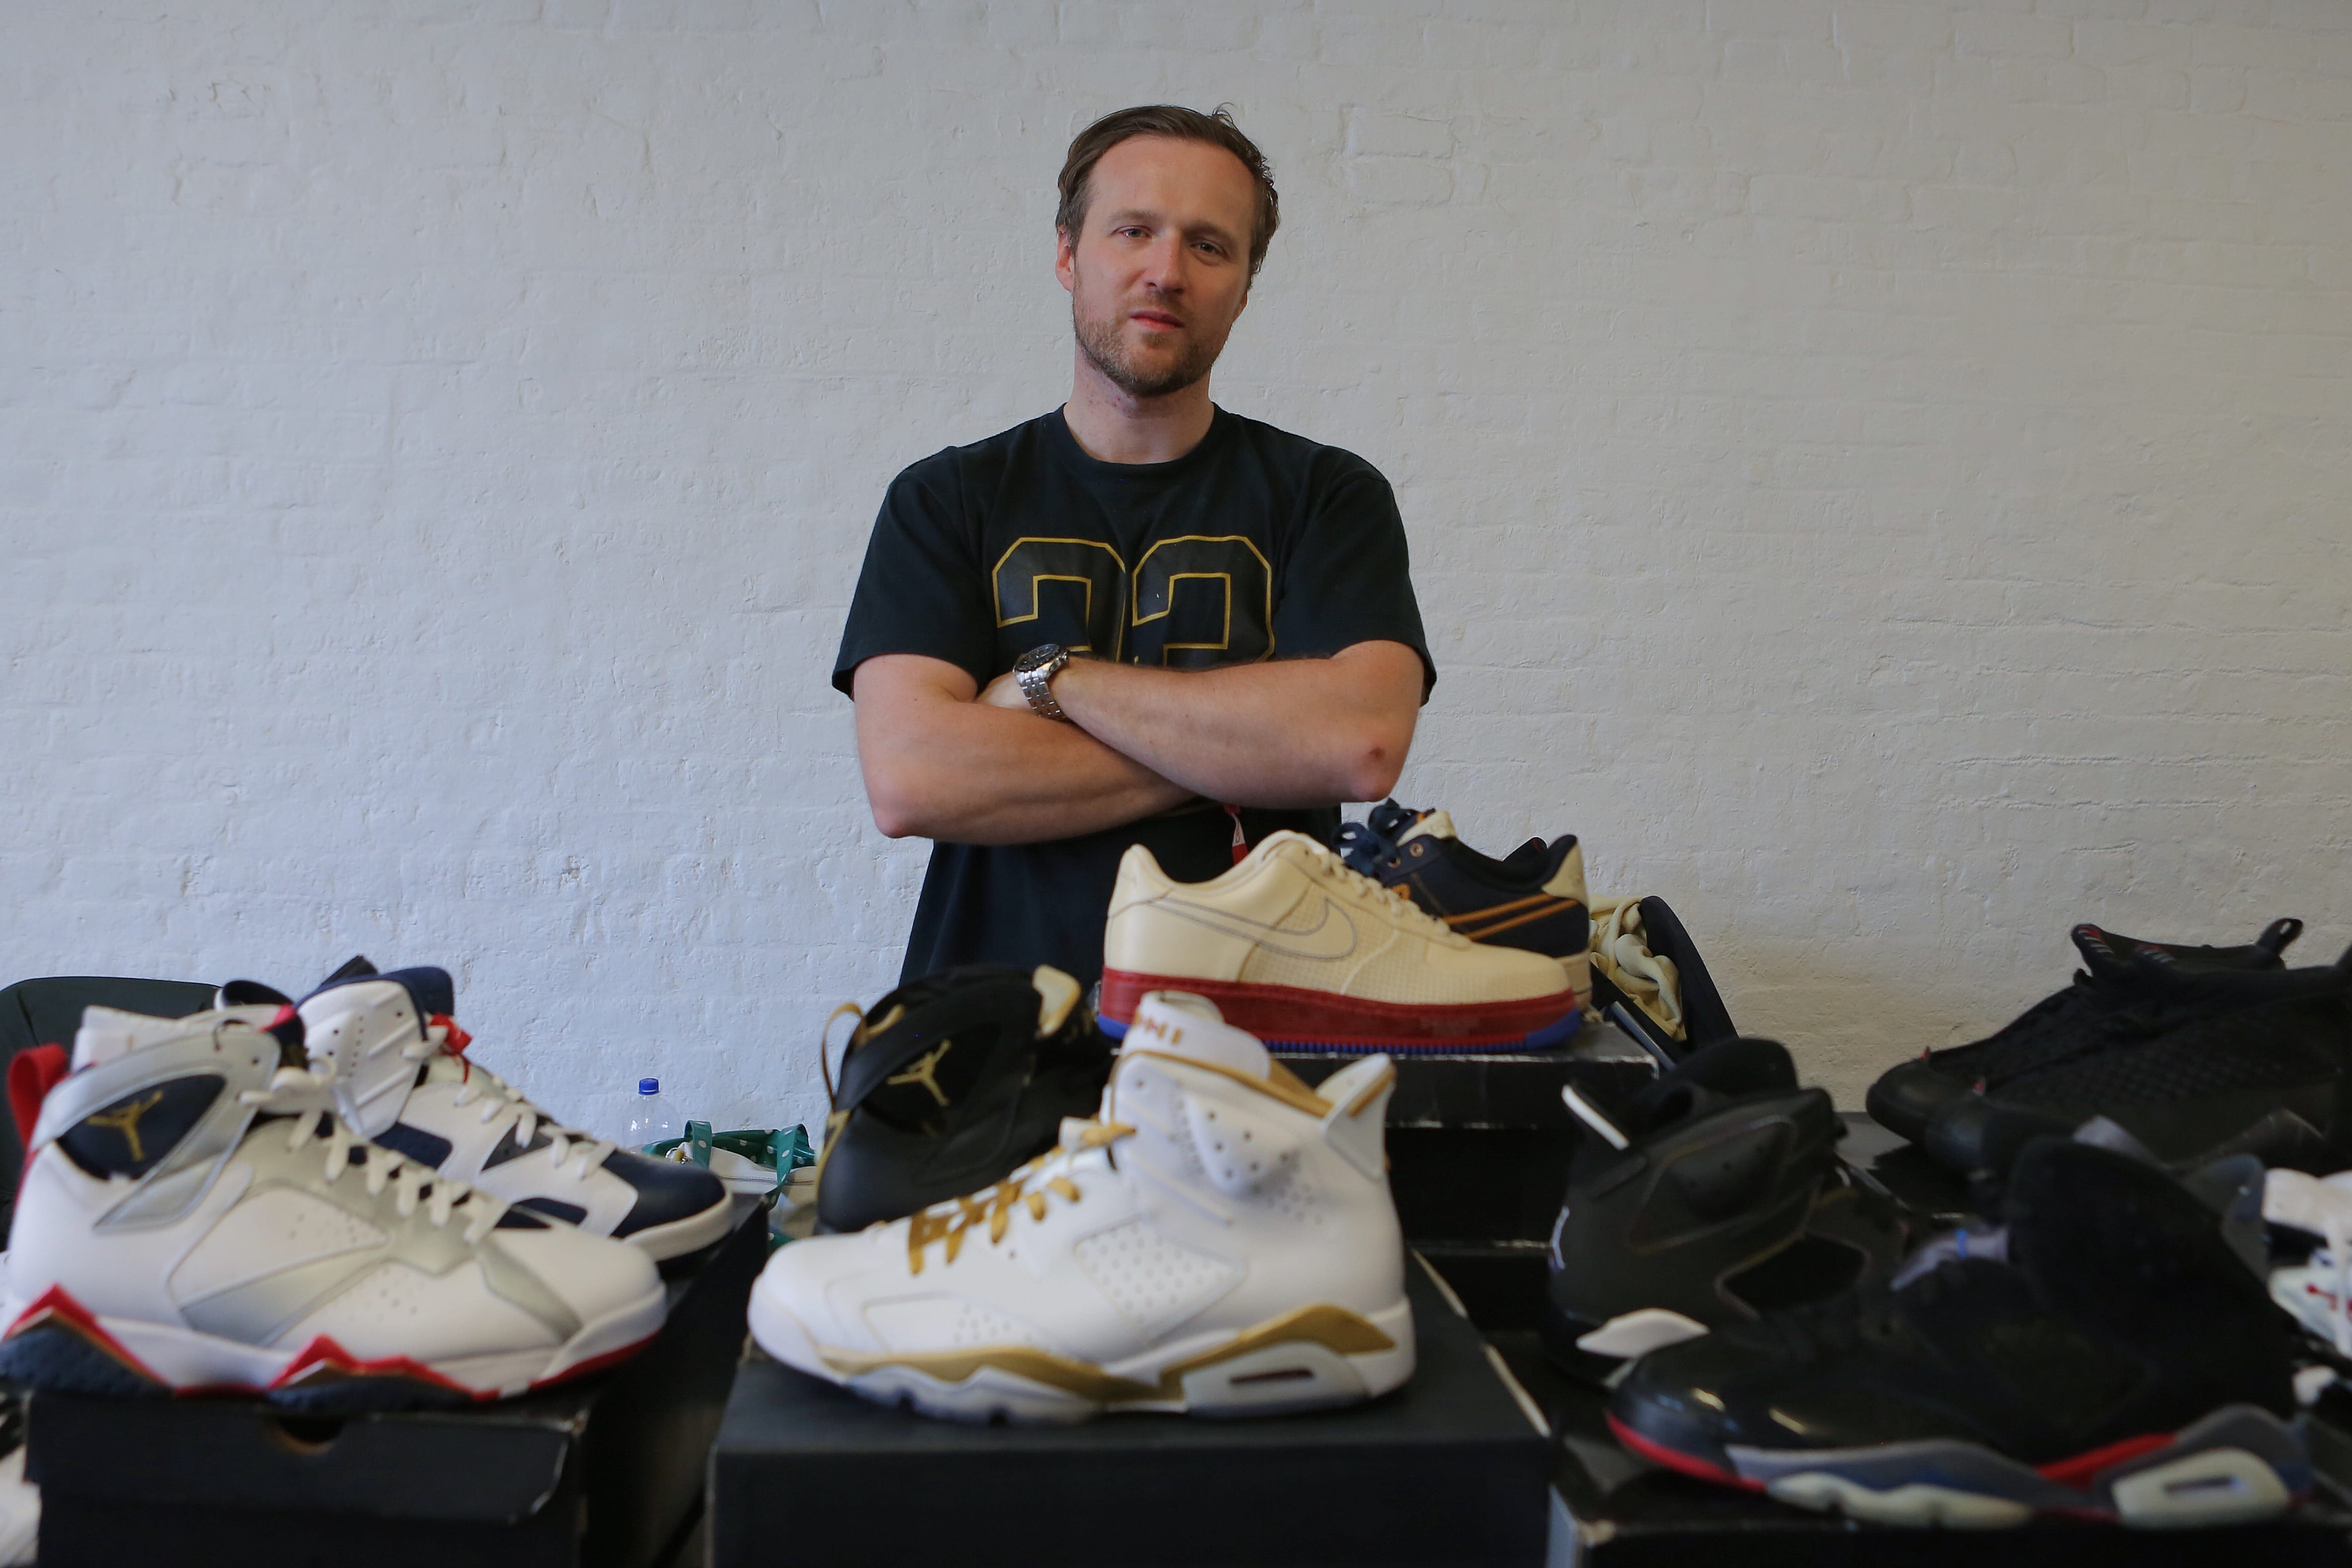 The consequences of scaling up sneaker culture | TechCrunch